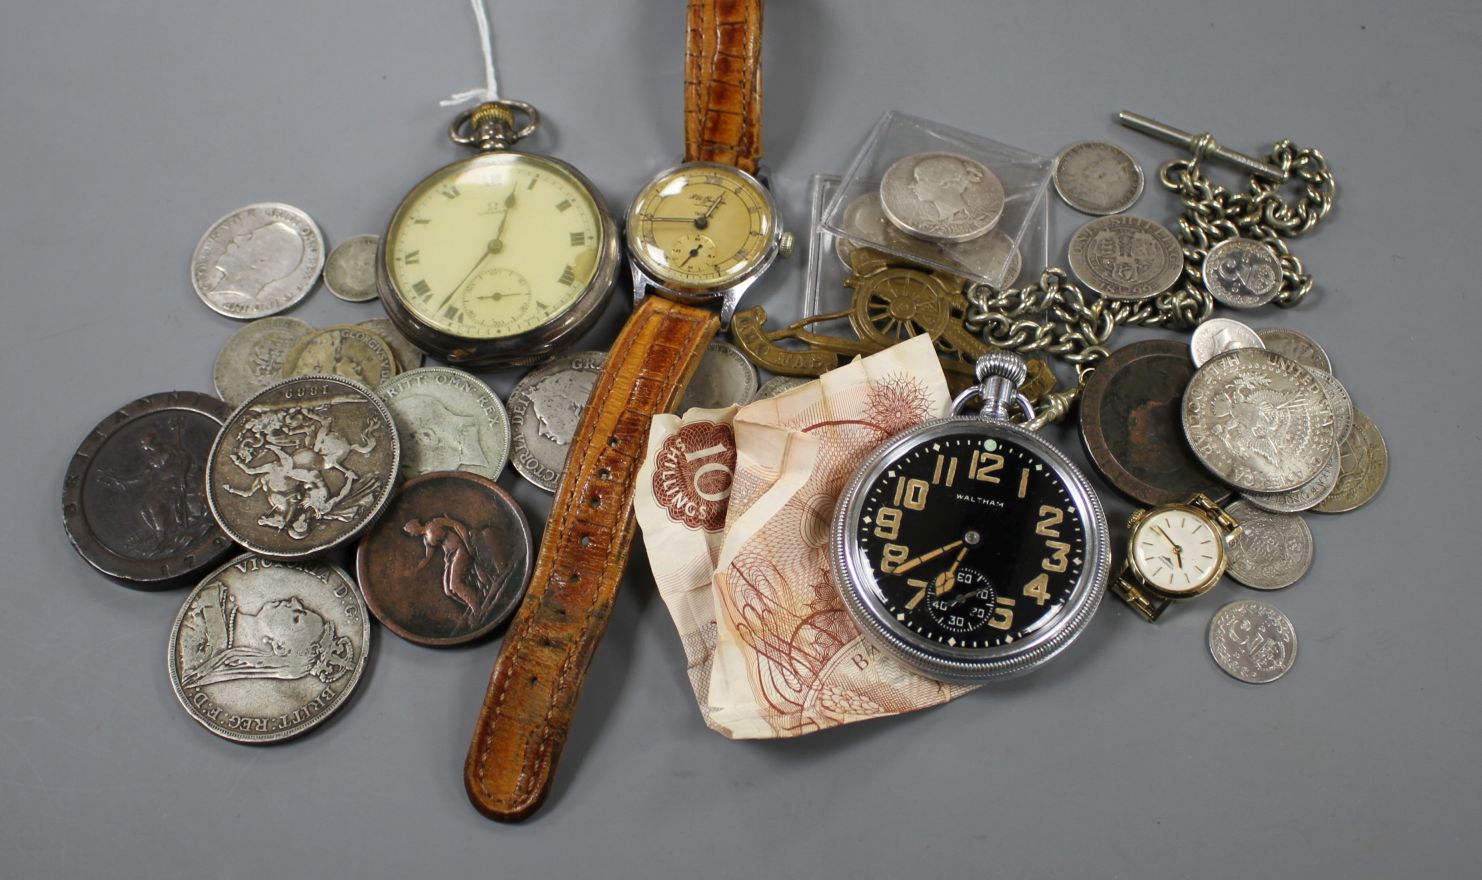 An Omega pocket watch, a Waltham military pocket watch, Benson Tropical wrist watch and assorted